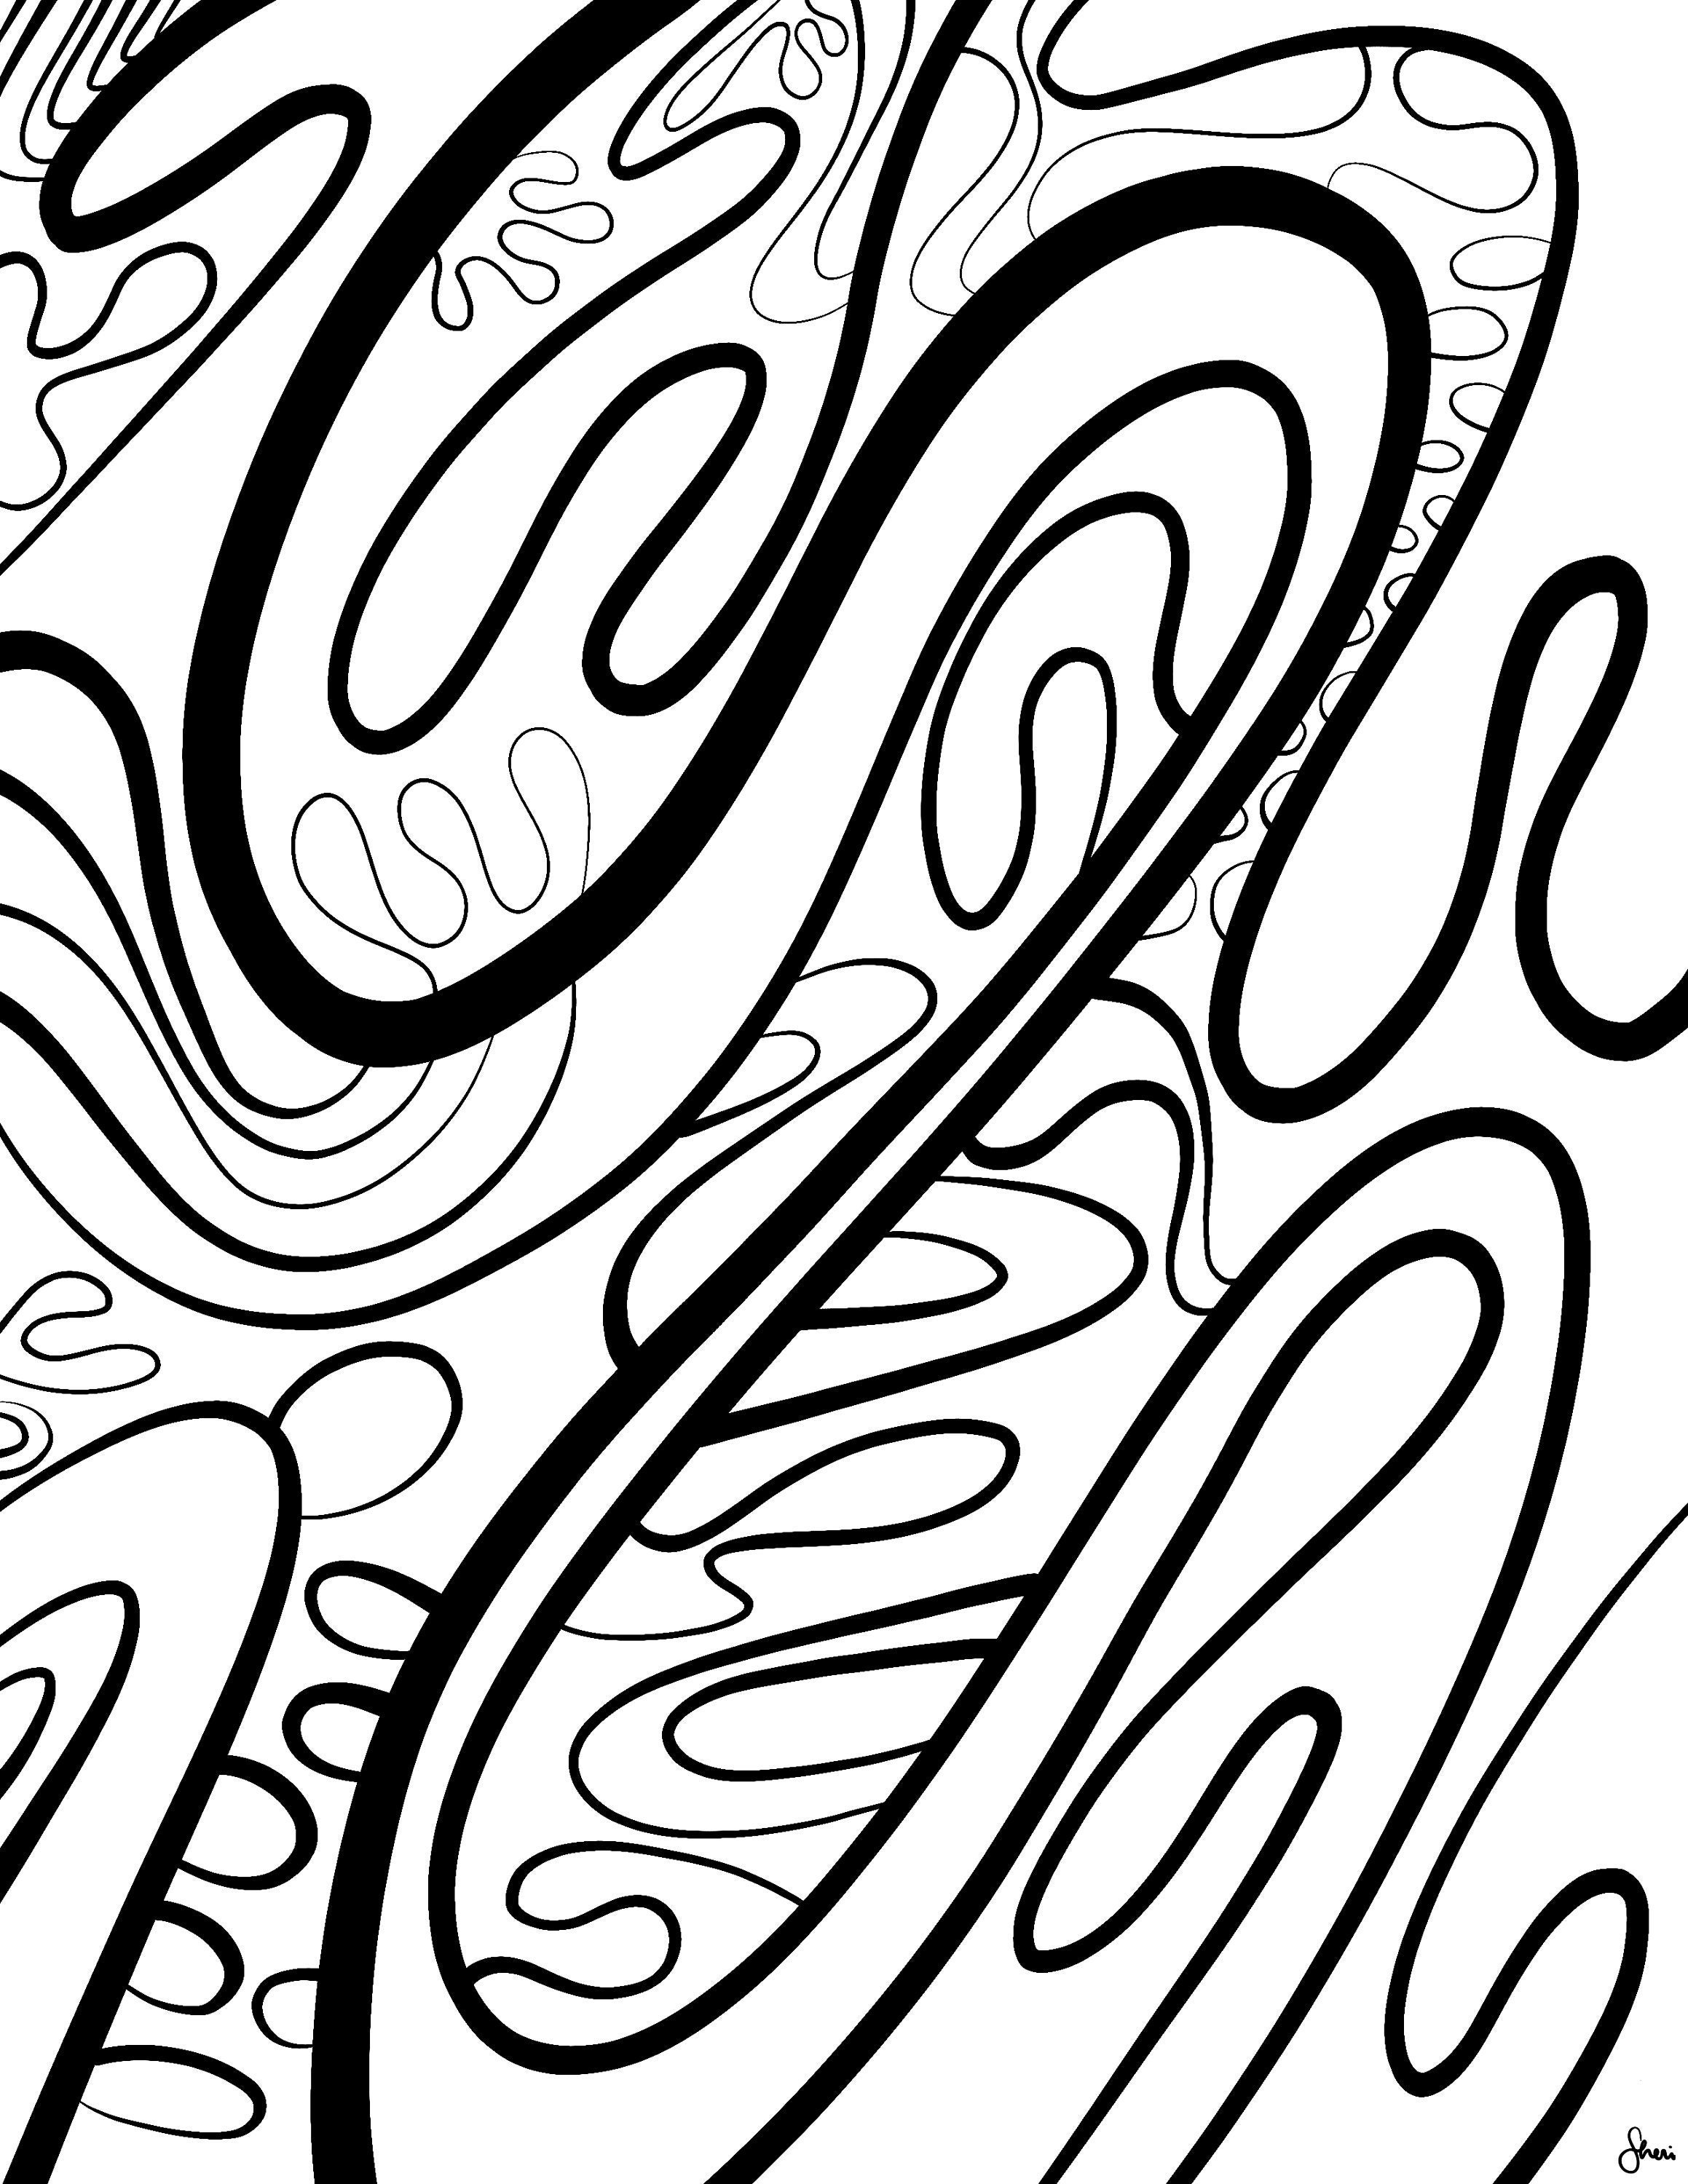 Groovy abstract coloring page for adults or kids instant download printable coloring page download now